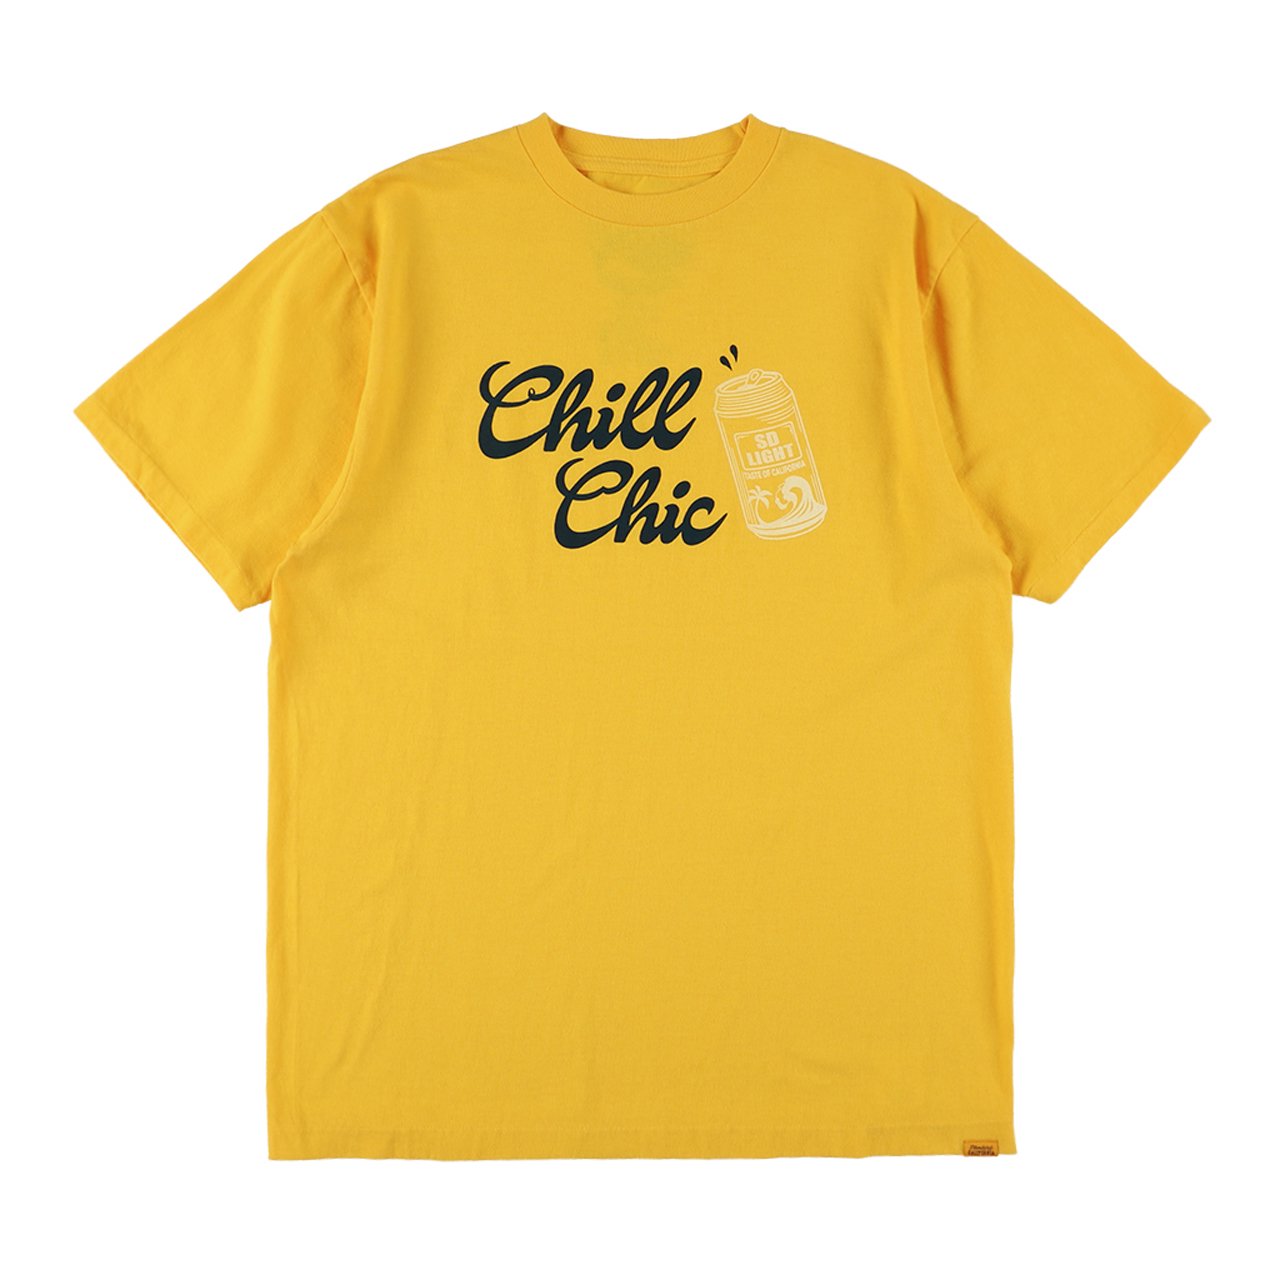 <img class='new_mark_img1' src='https://img.shop-pro.jp/img/new/icons5.gif' style='border:none;display:inline;margin:0px;padding:0px;width:auto;' />STANDARD CALIFORNIA ( ե˥)Chill Chic Tee Yellow